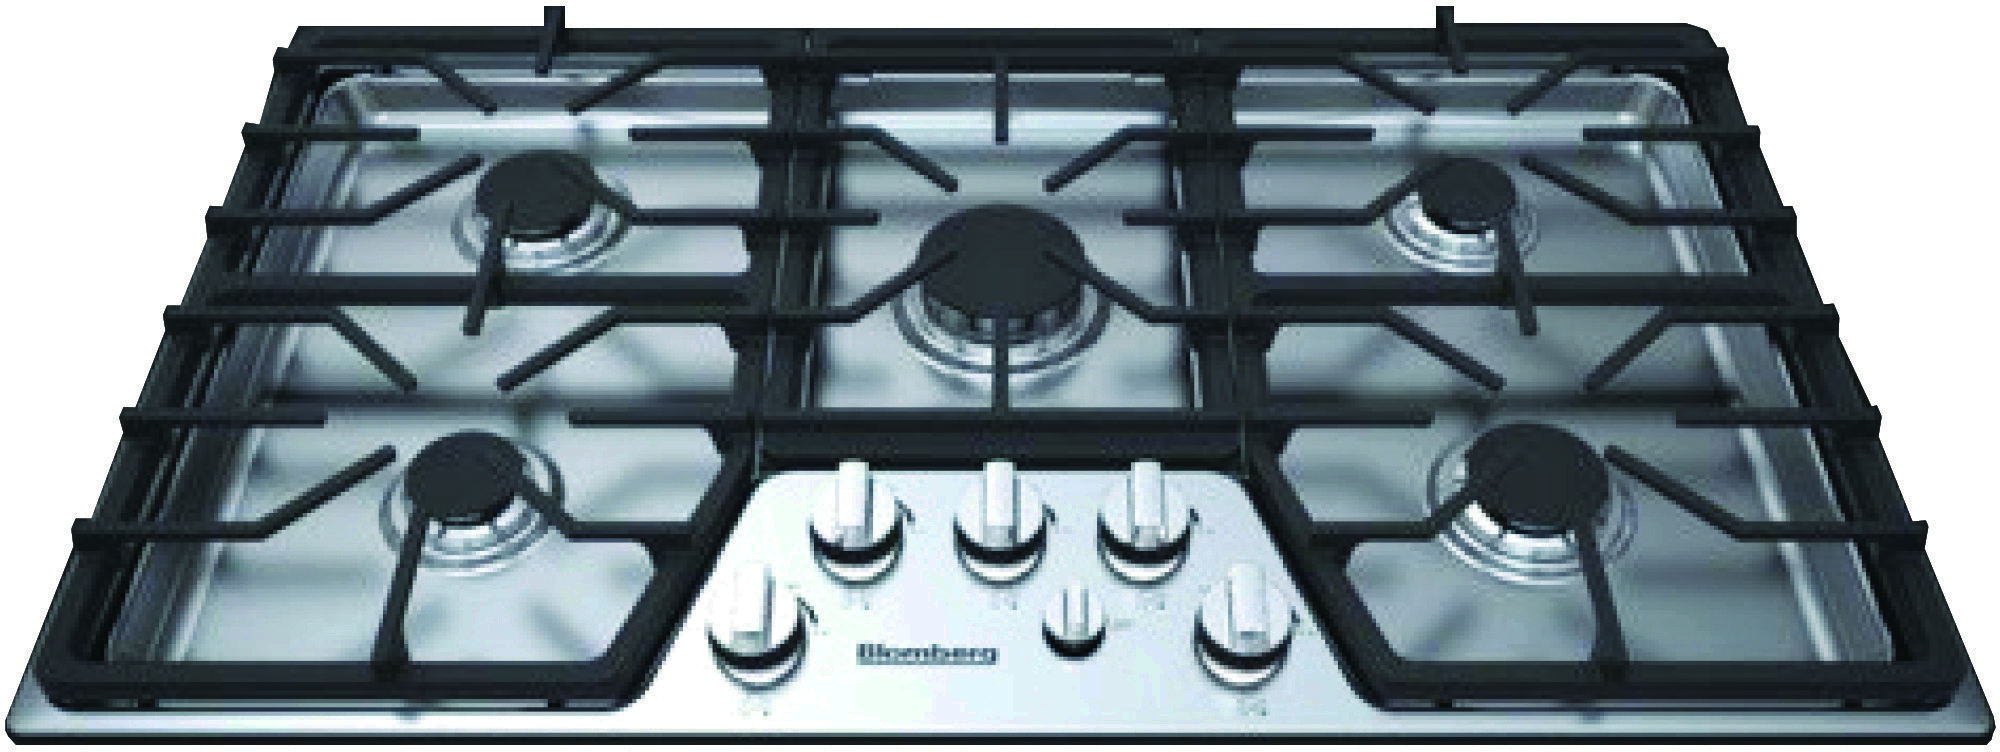 36"" Natural Gas Drop-In Cooktop - Blomberg CTG36500SS